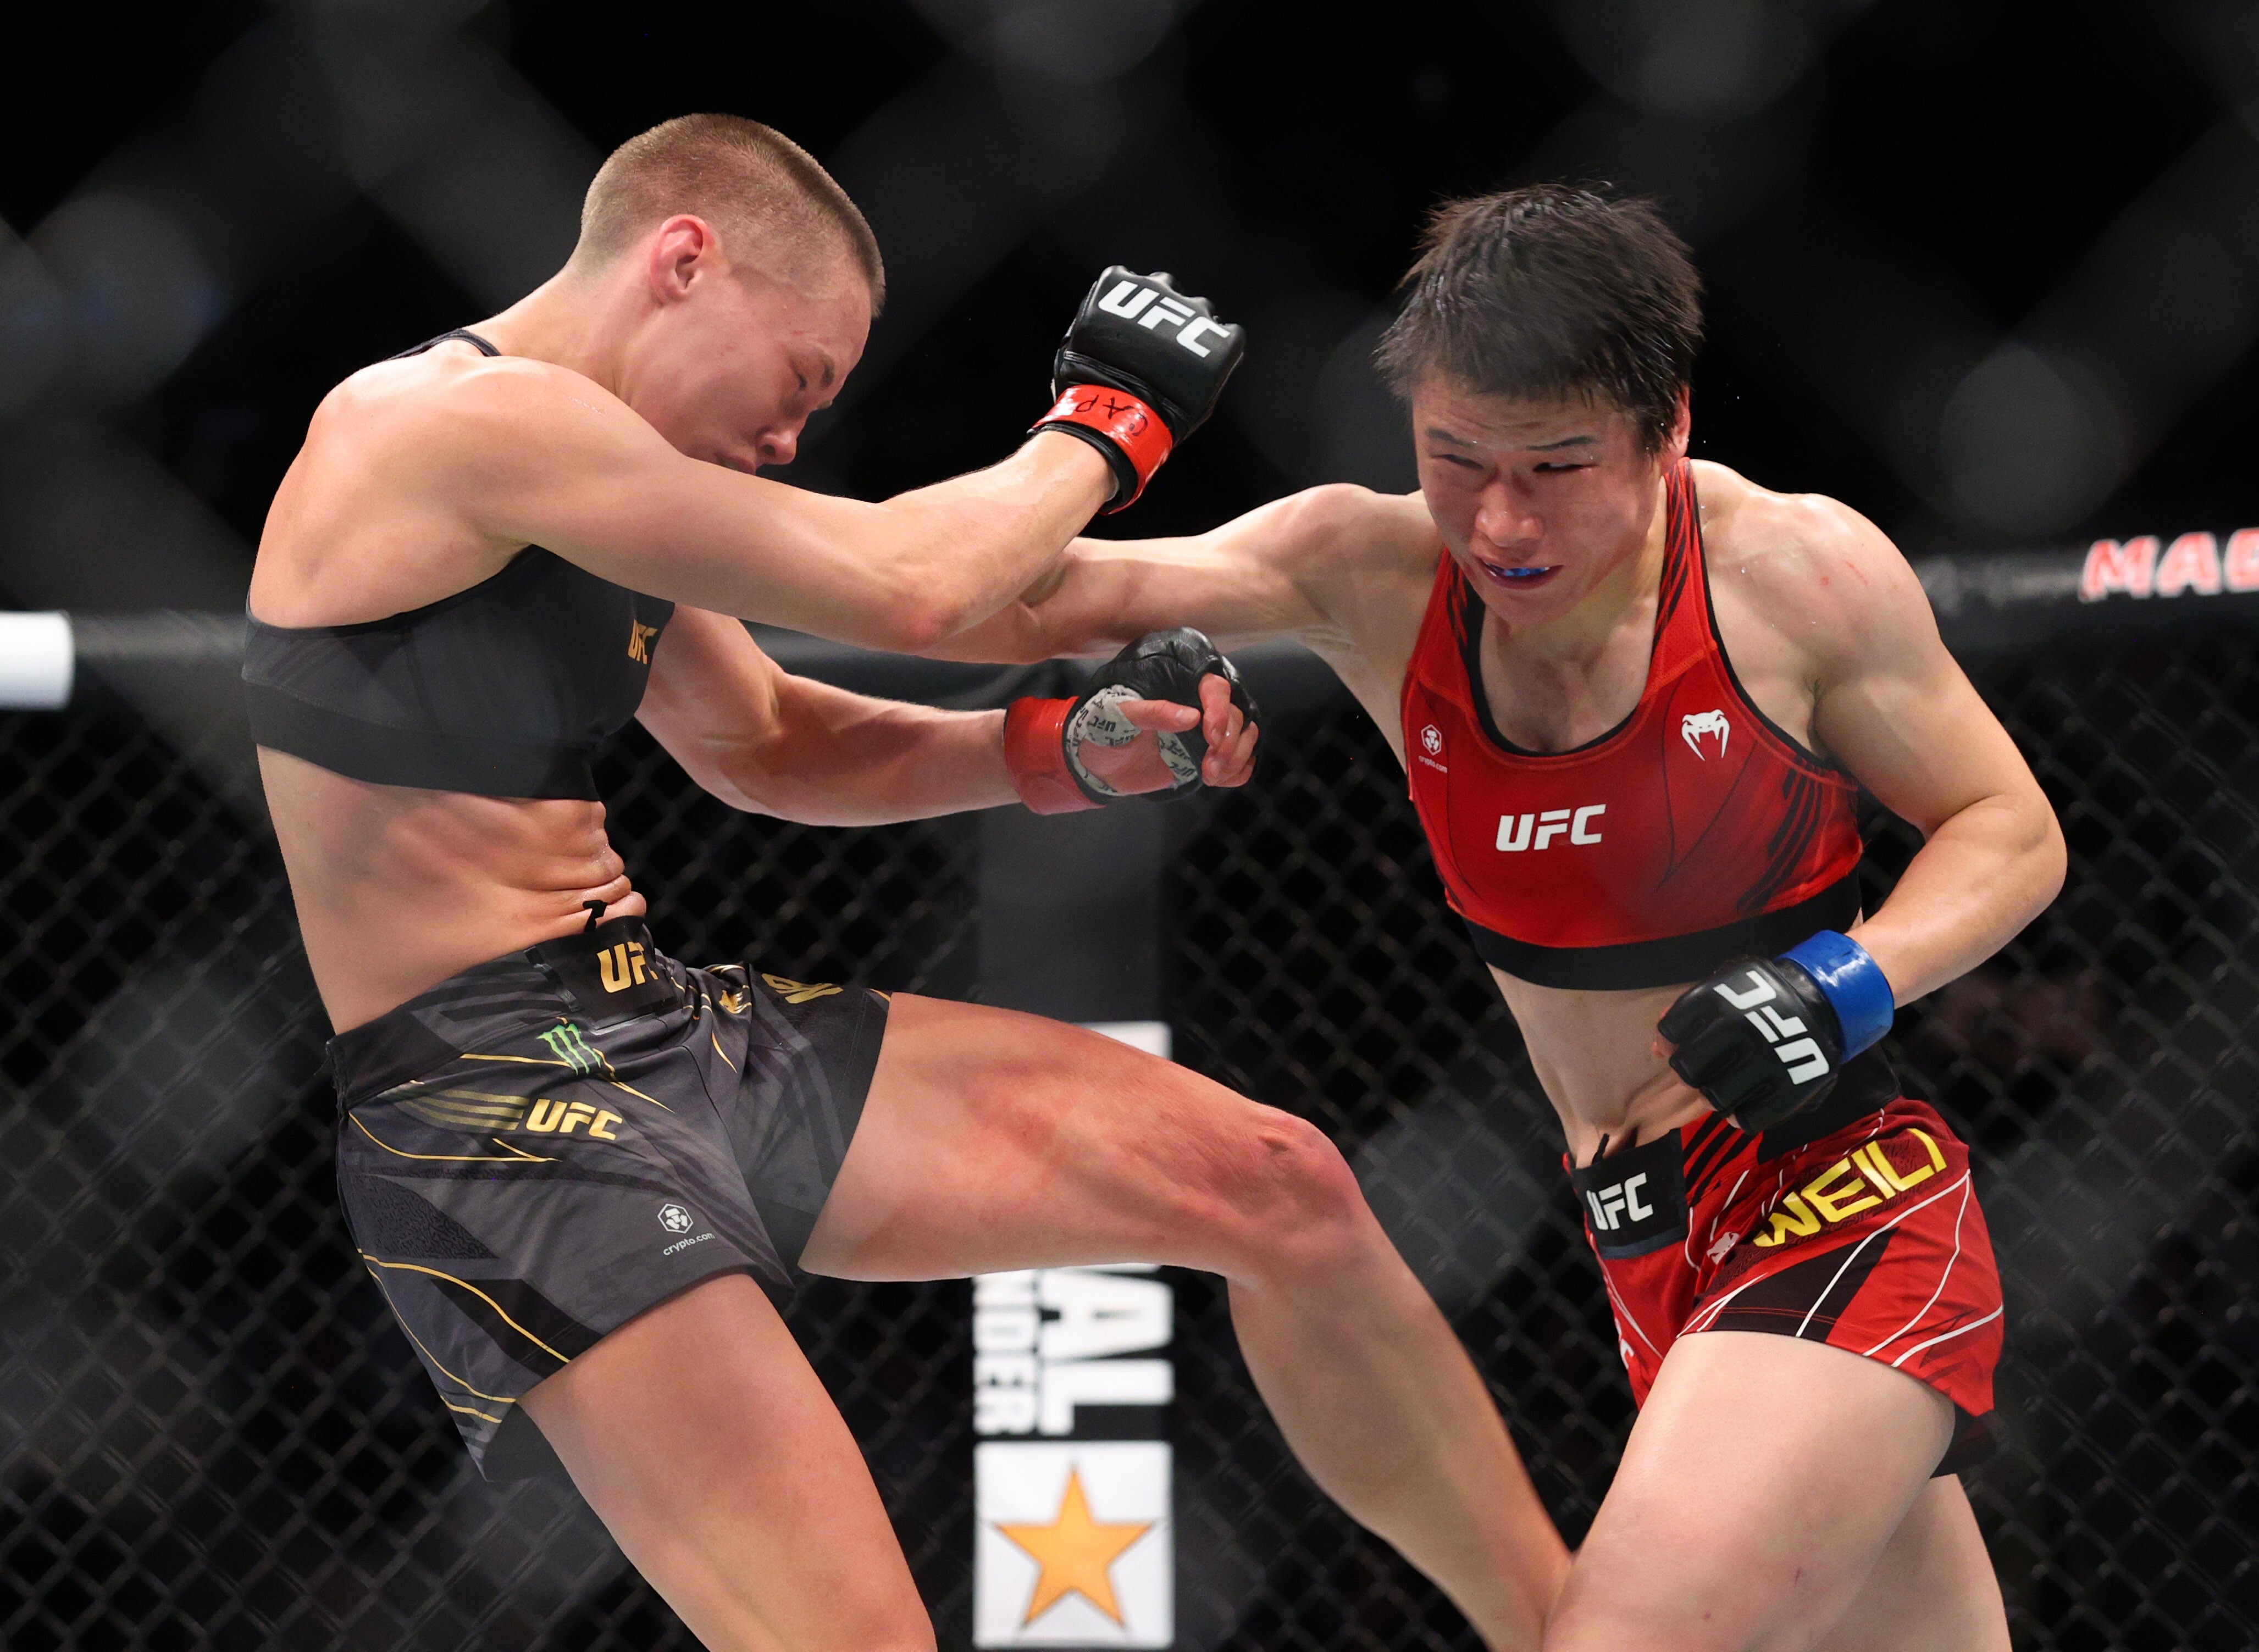 Rose Namajunas (left) throws a punch against Zhang Weili at UFC 268. Photo: USA TODAY Sports